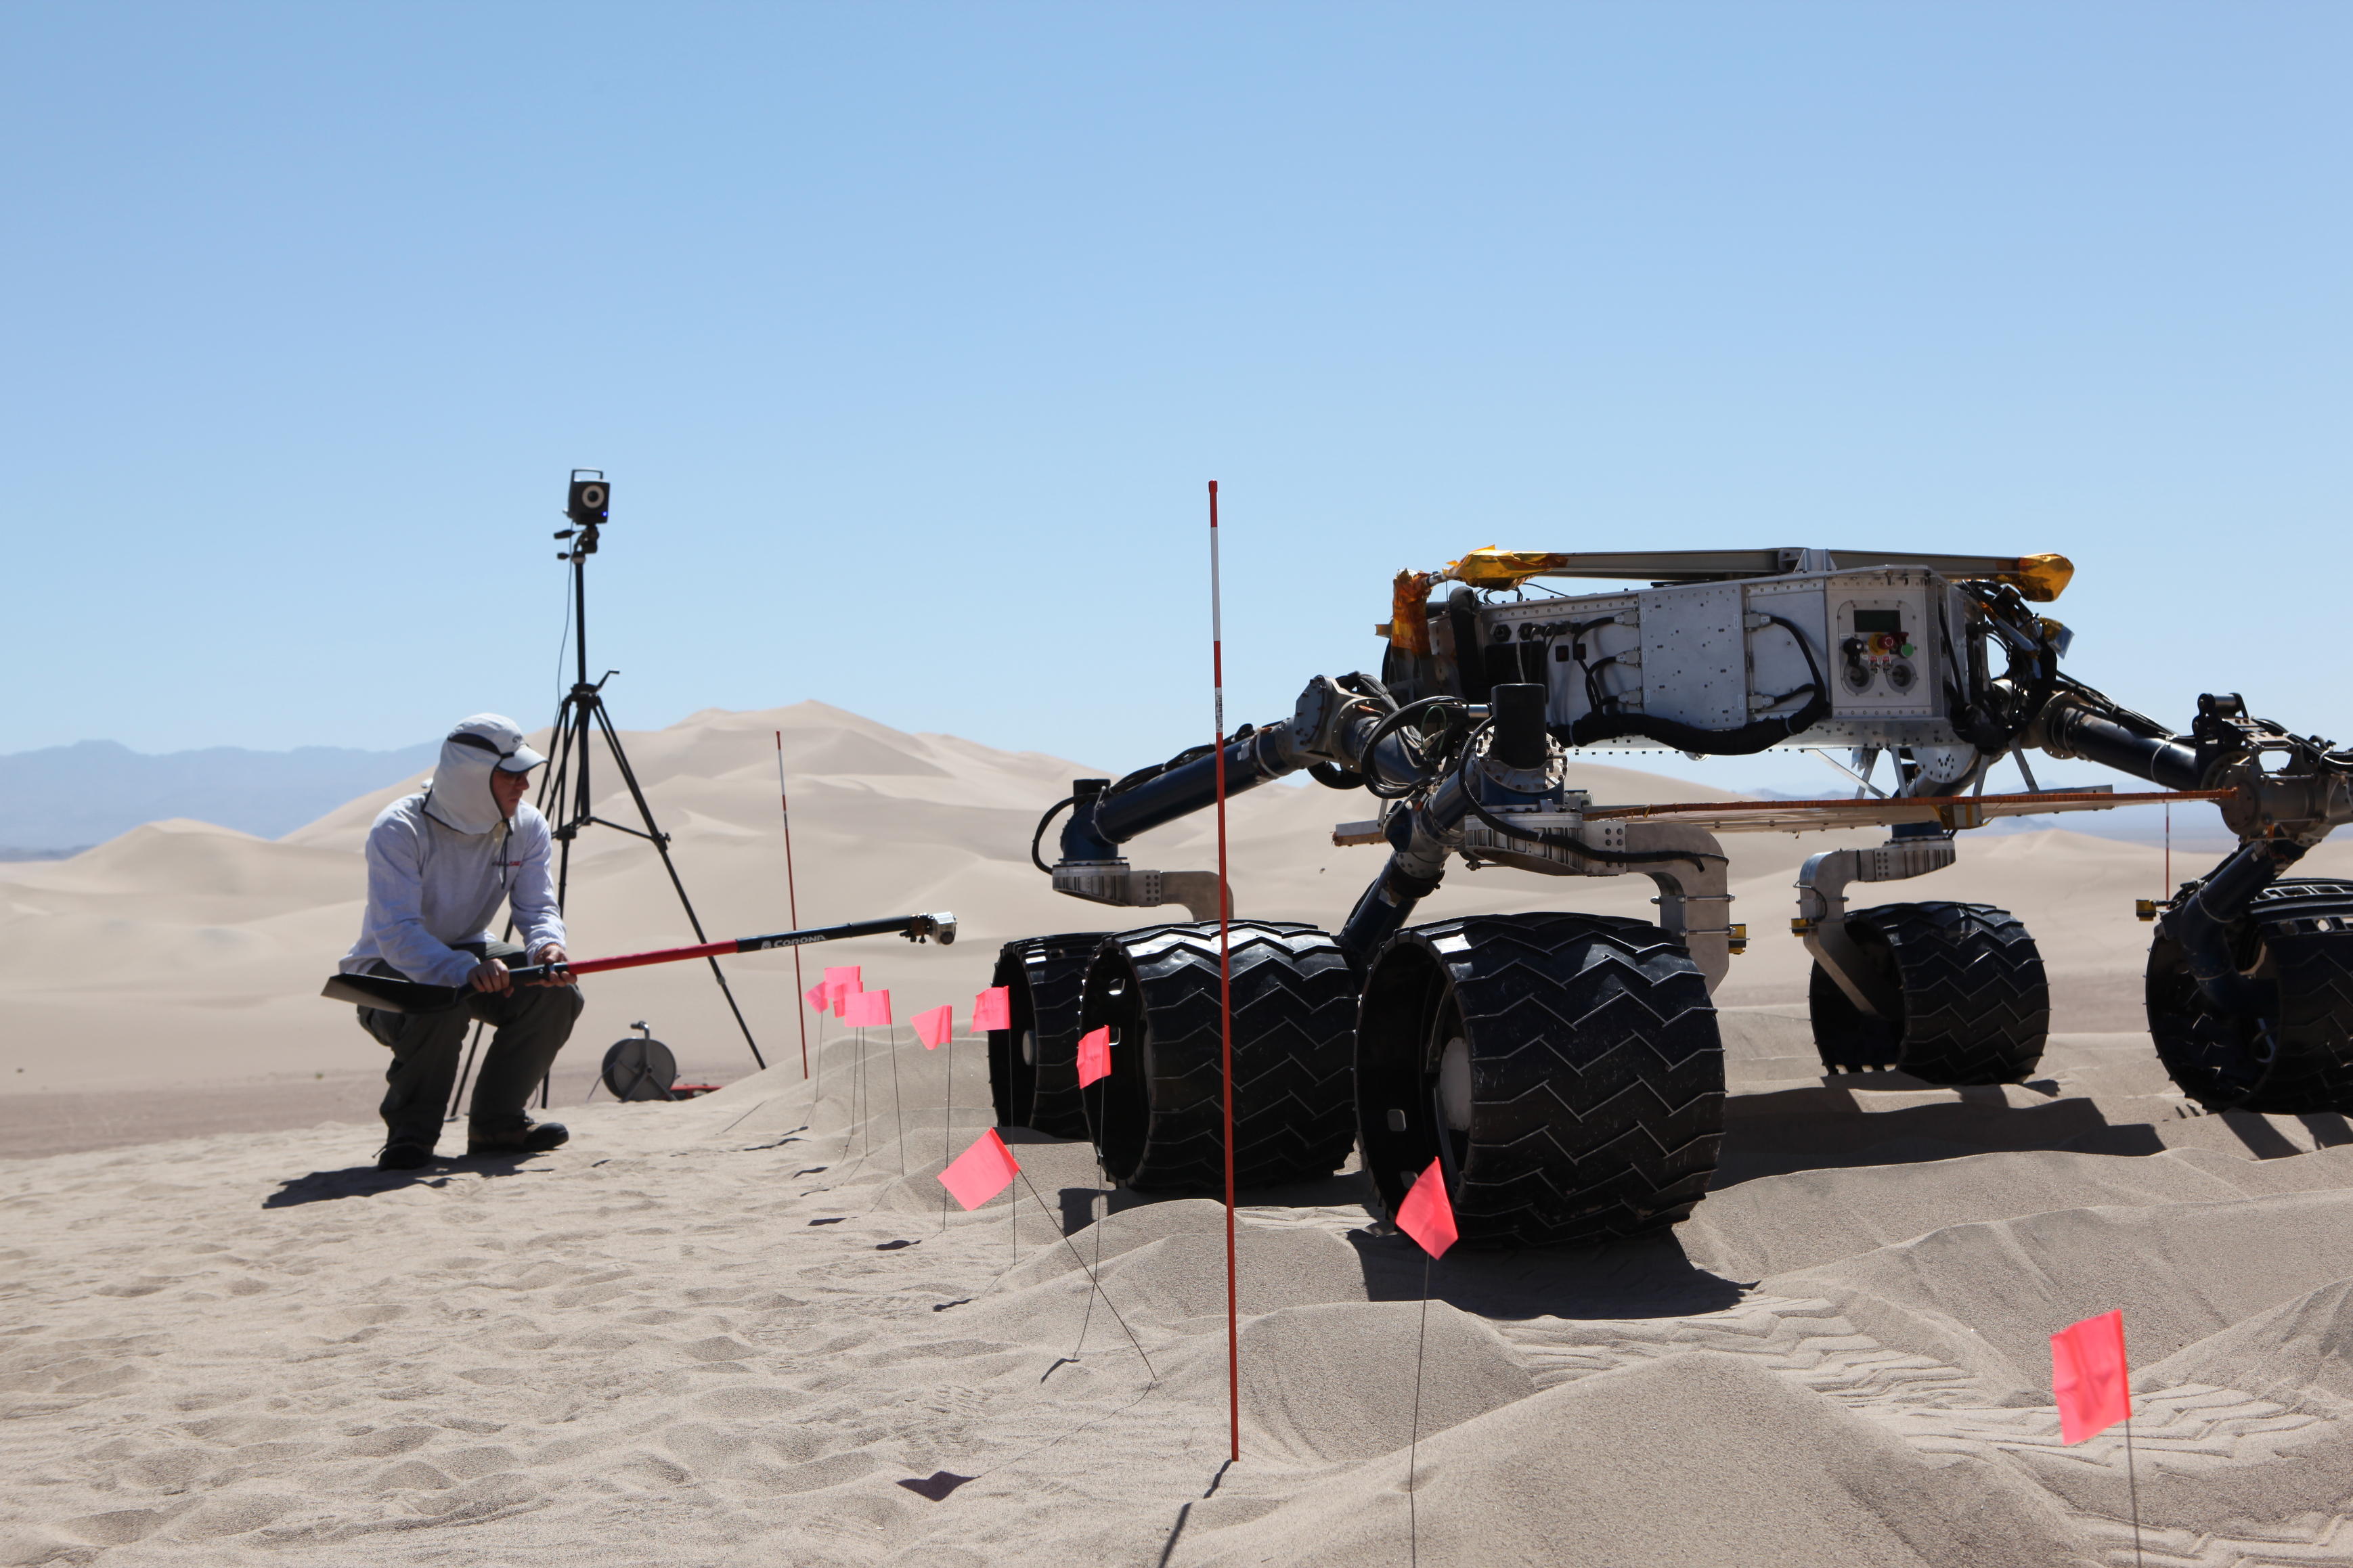 sand dune, mars rover, wheel, Dumont, Scarecrow, test - This image shows the scarecrow test rover going over a dunes obstacle course, while an engineer hunches down to see the wheels as it drives.